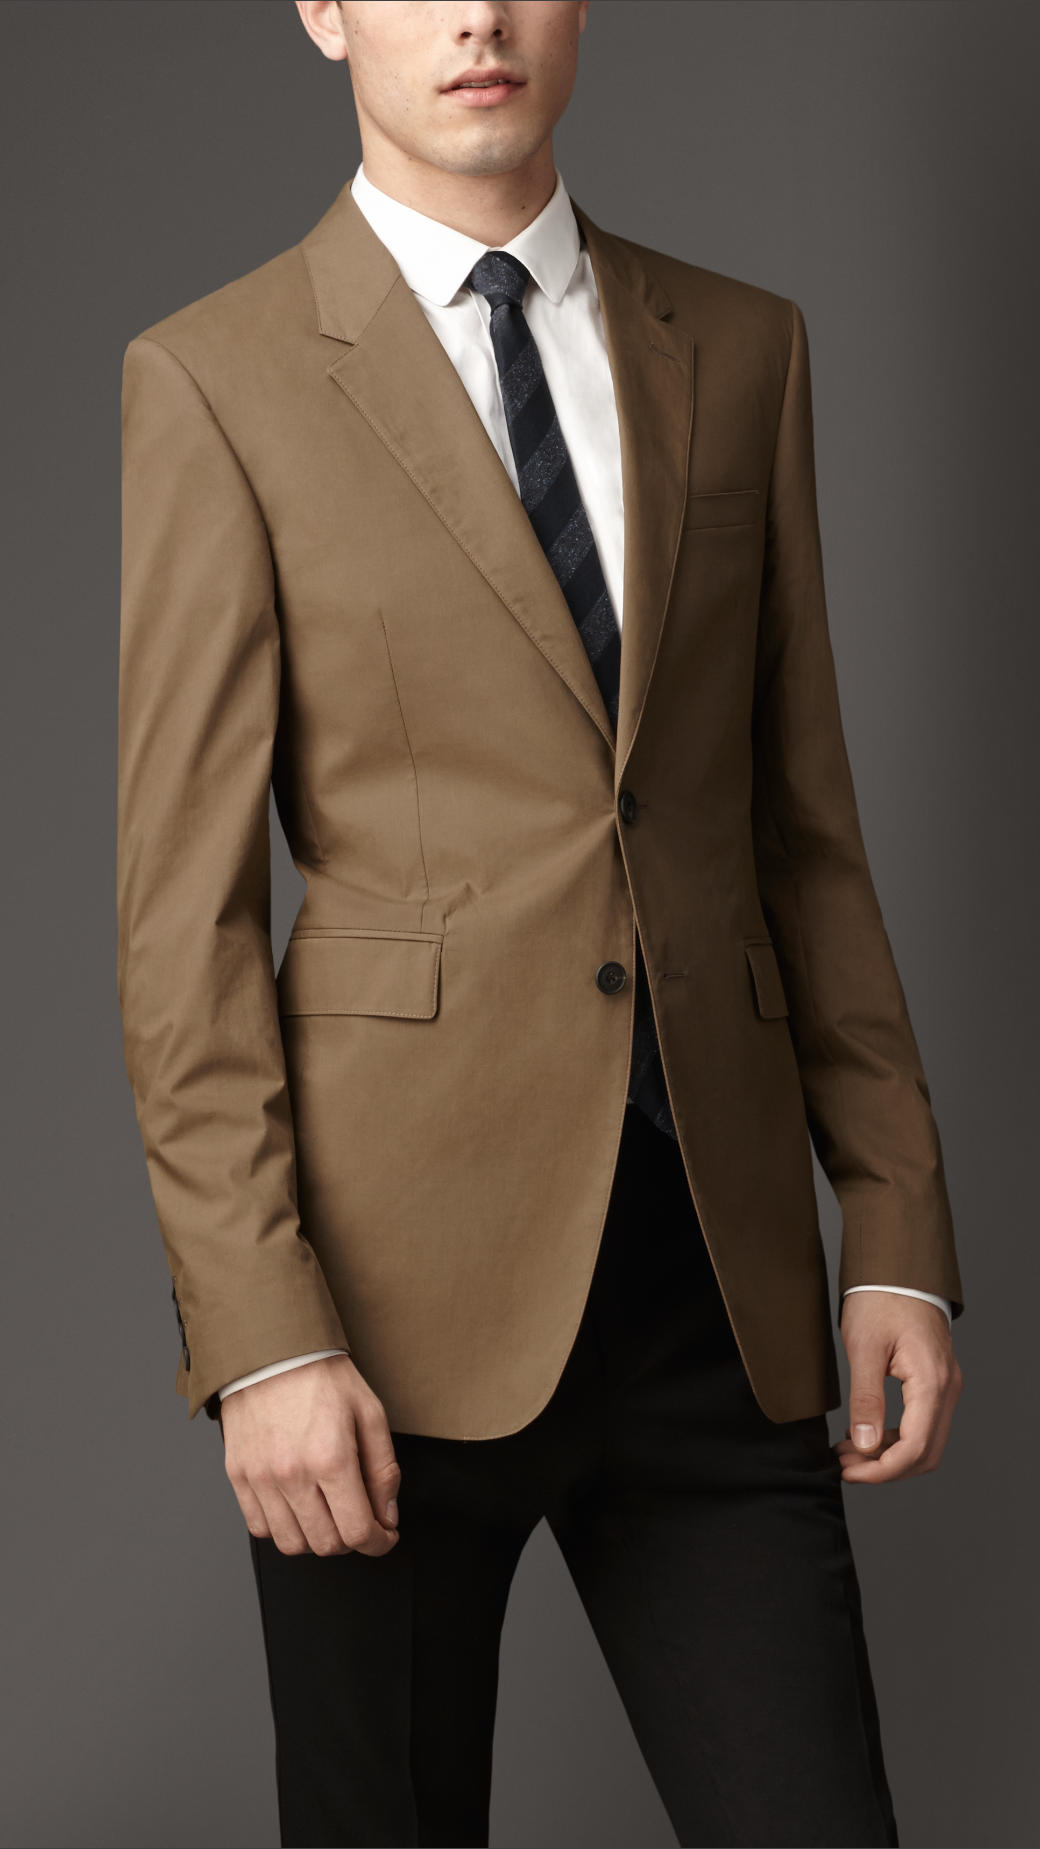 Lyst - Burberry Modern Fit Cotton Poplin Jacket in Natural for Men